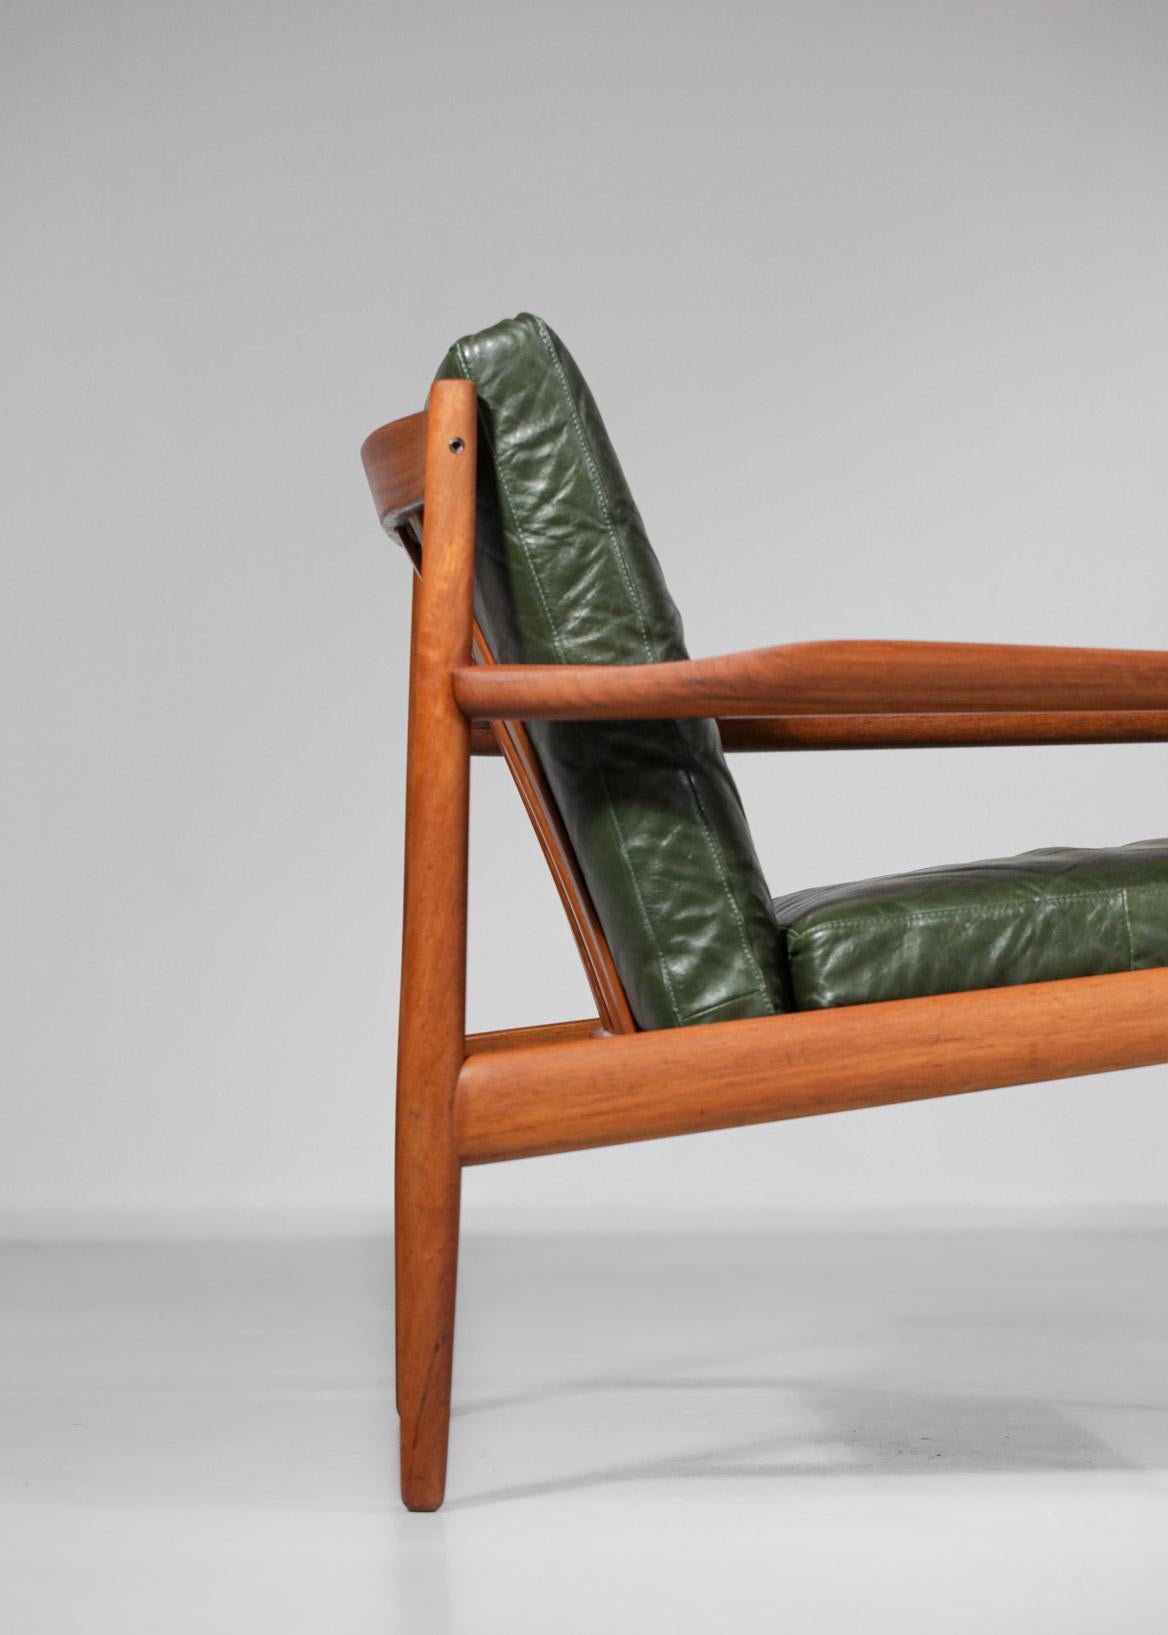 Pair of armchairs of the famous designer Arne Vodder of the years 1960 published Glostrup. Structure in solid teak and cushion in dark green leather of origin. Very nice work on the curved arms typical of the Scandinavian design of the time.